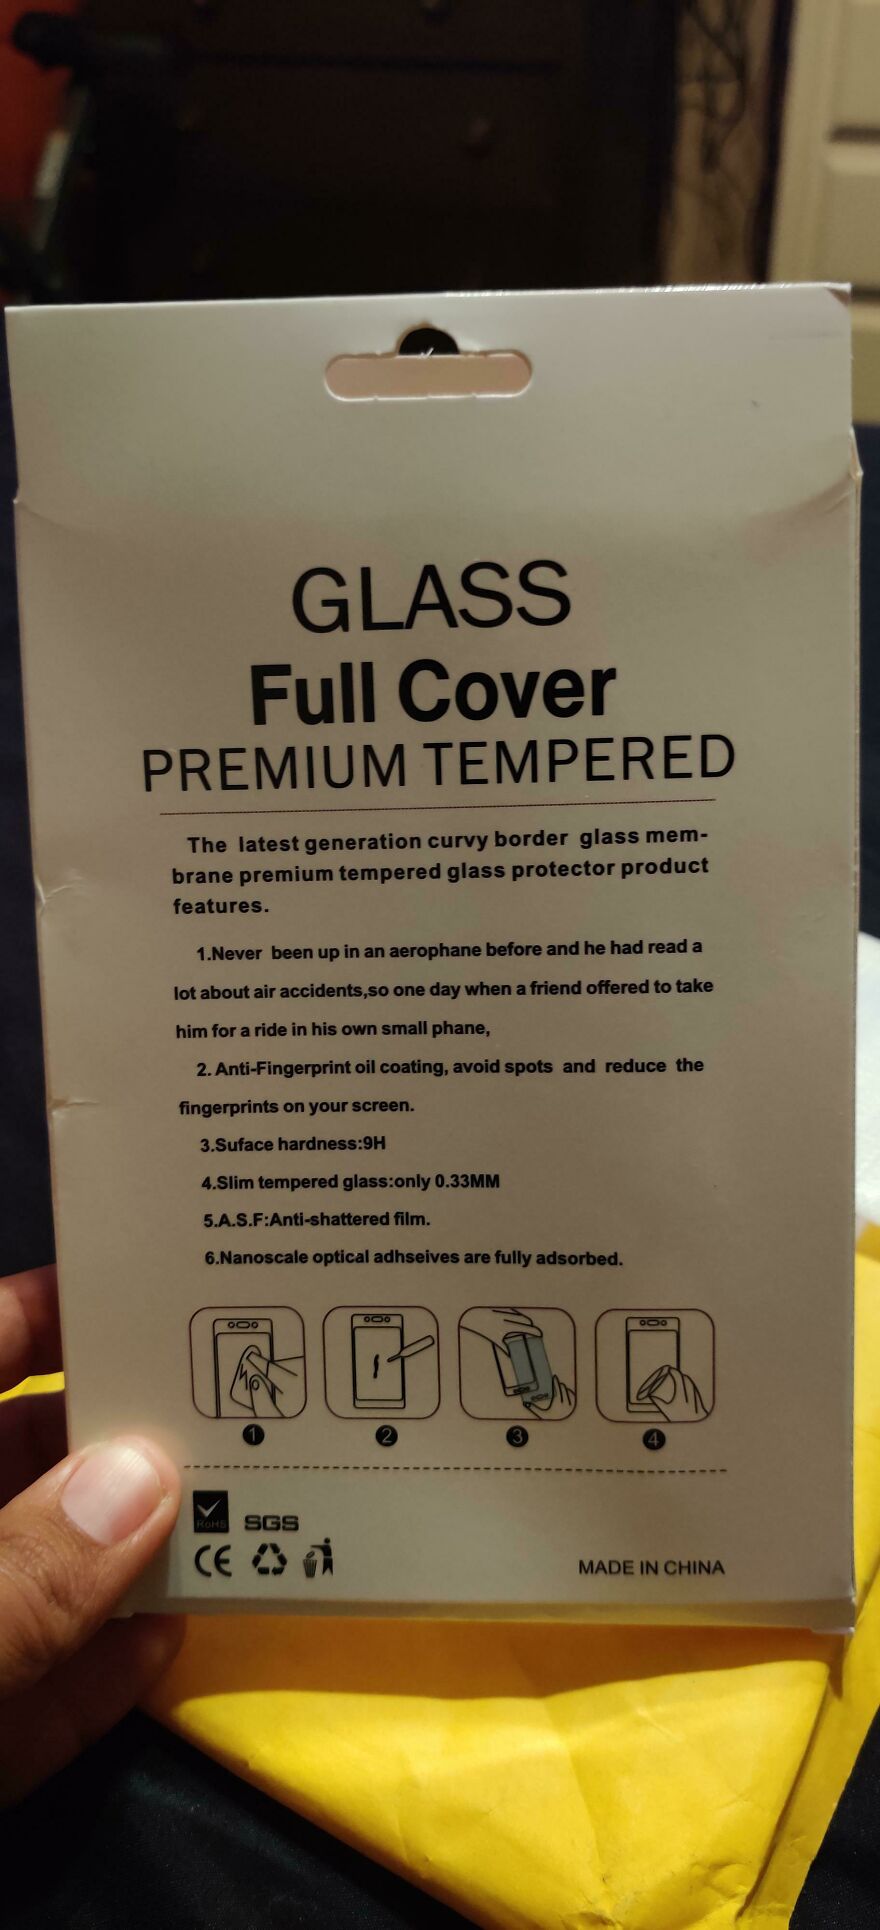 My Phone Screen Protector Did Not Come With Instructions So I Checked The Back Of The Box. Let's Start With #1 Shall We